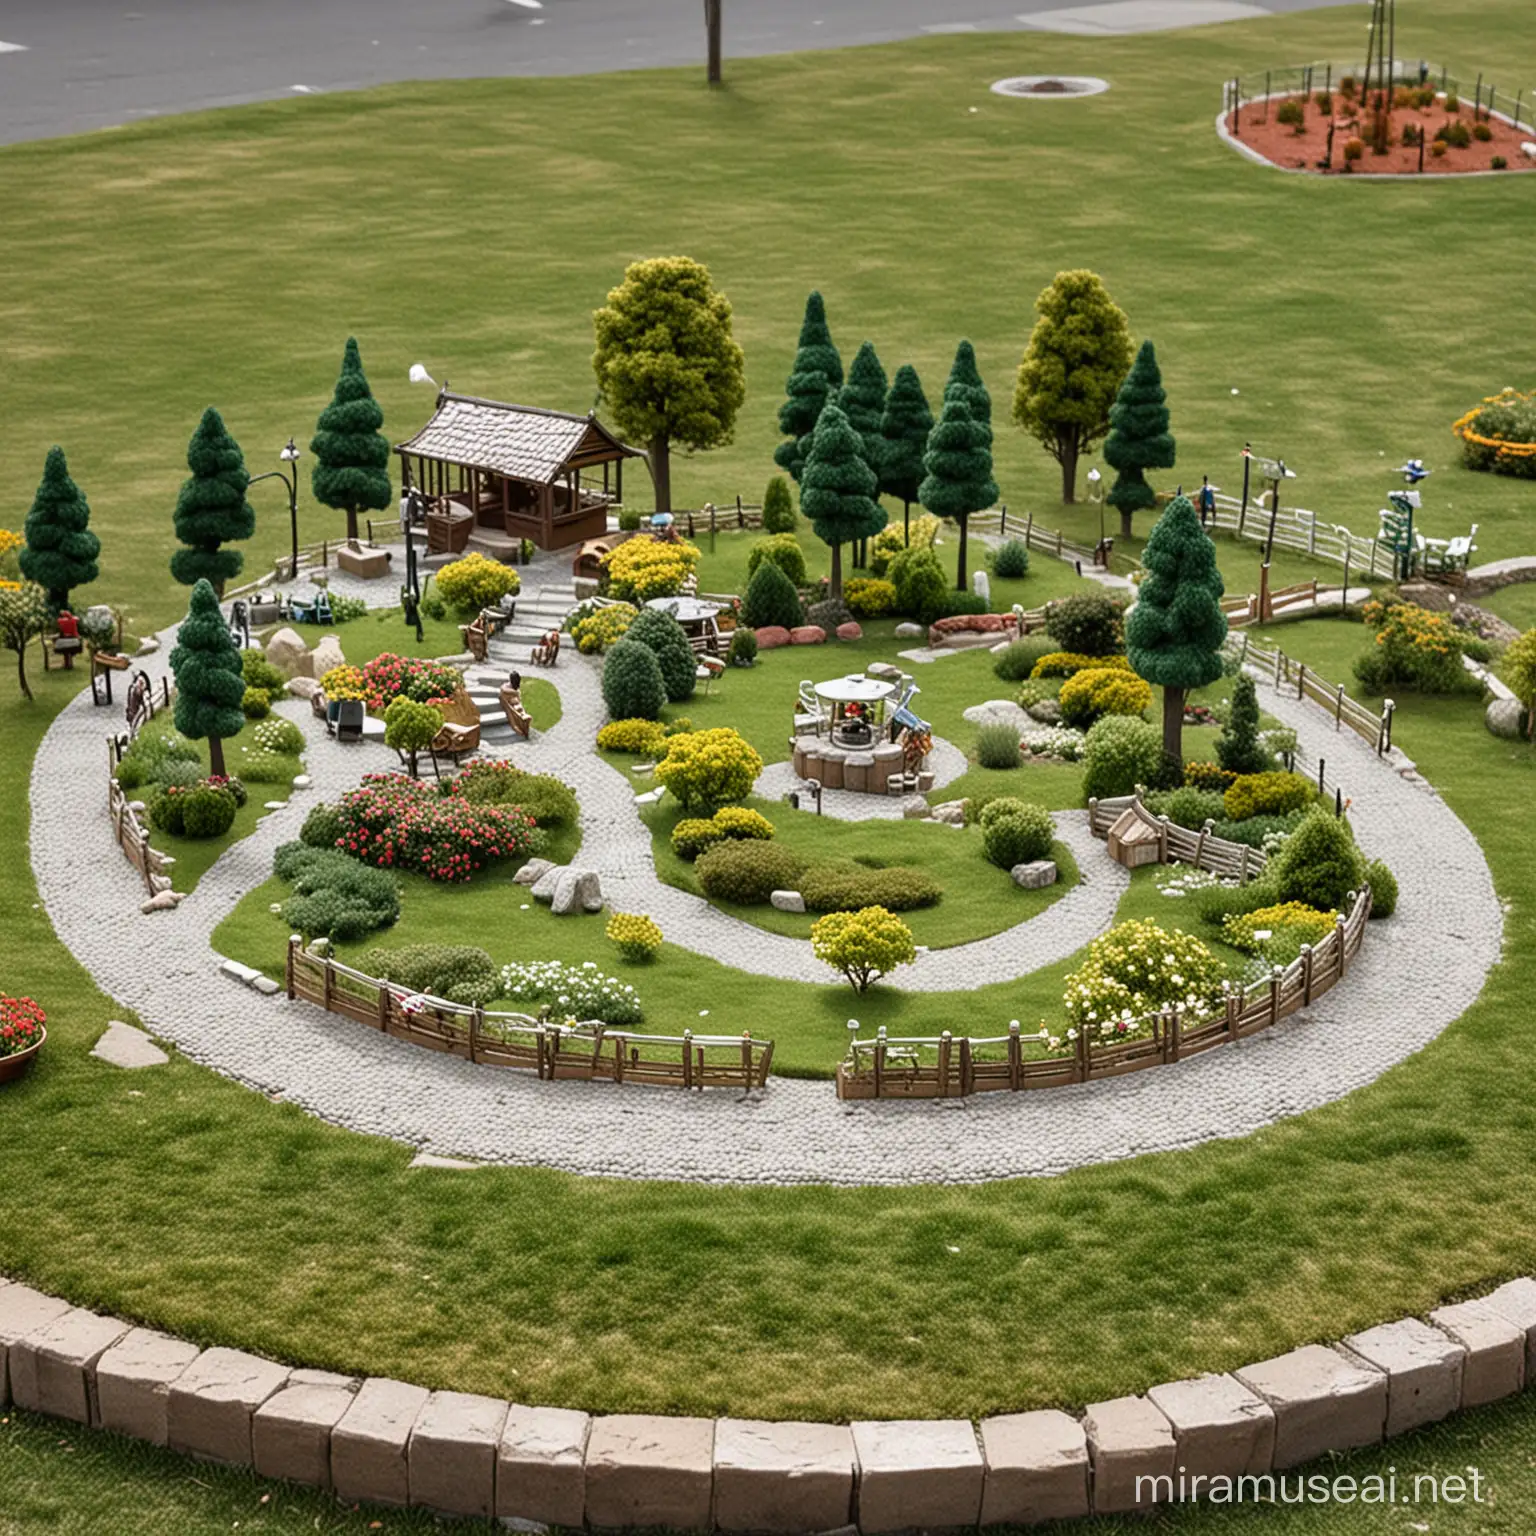 Enchanting Miniature Park with Intricate Landscapes and Tiny Structures